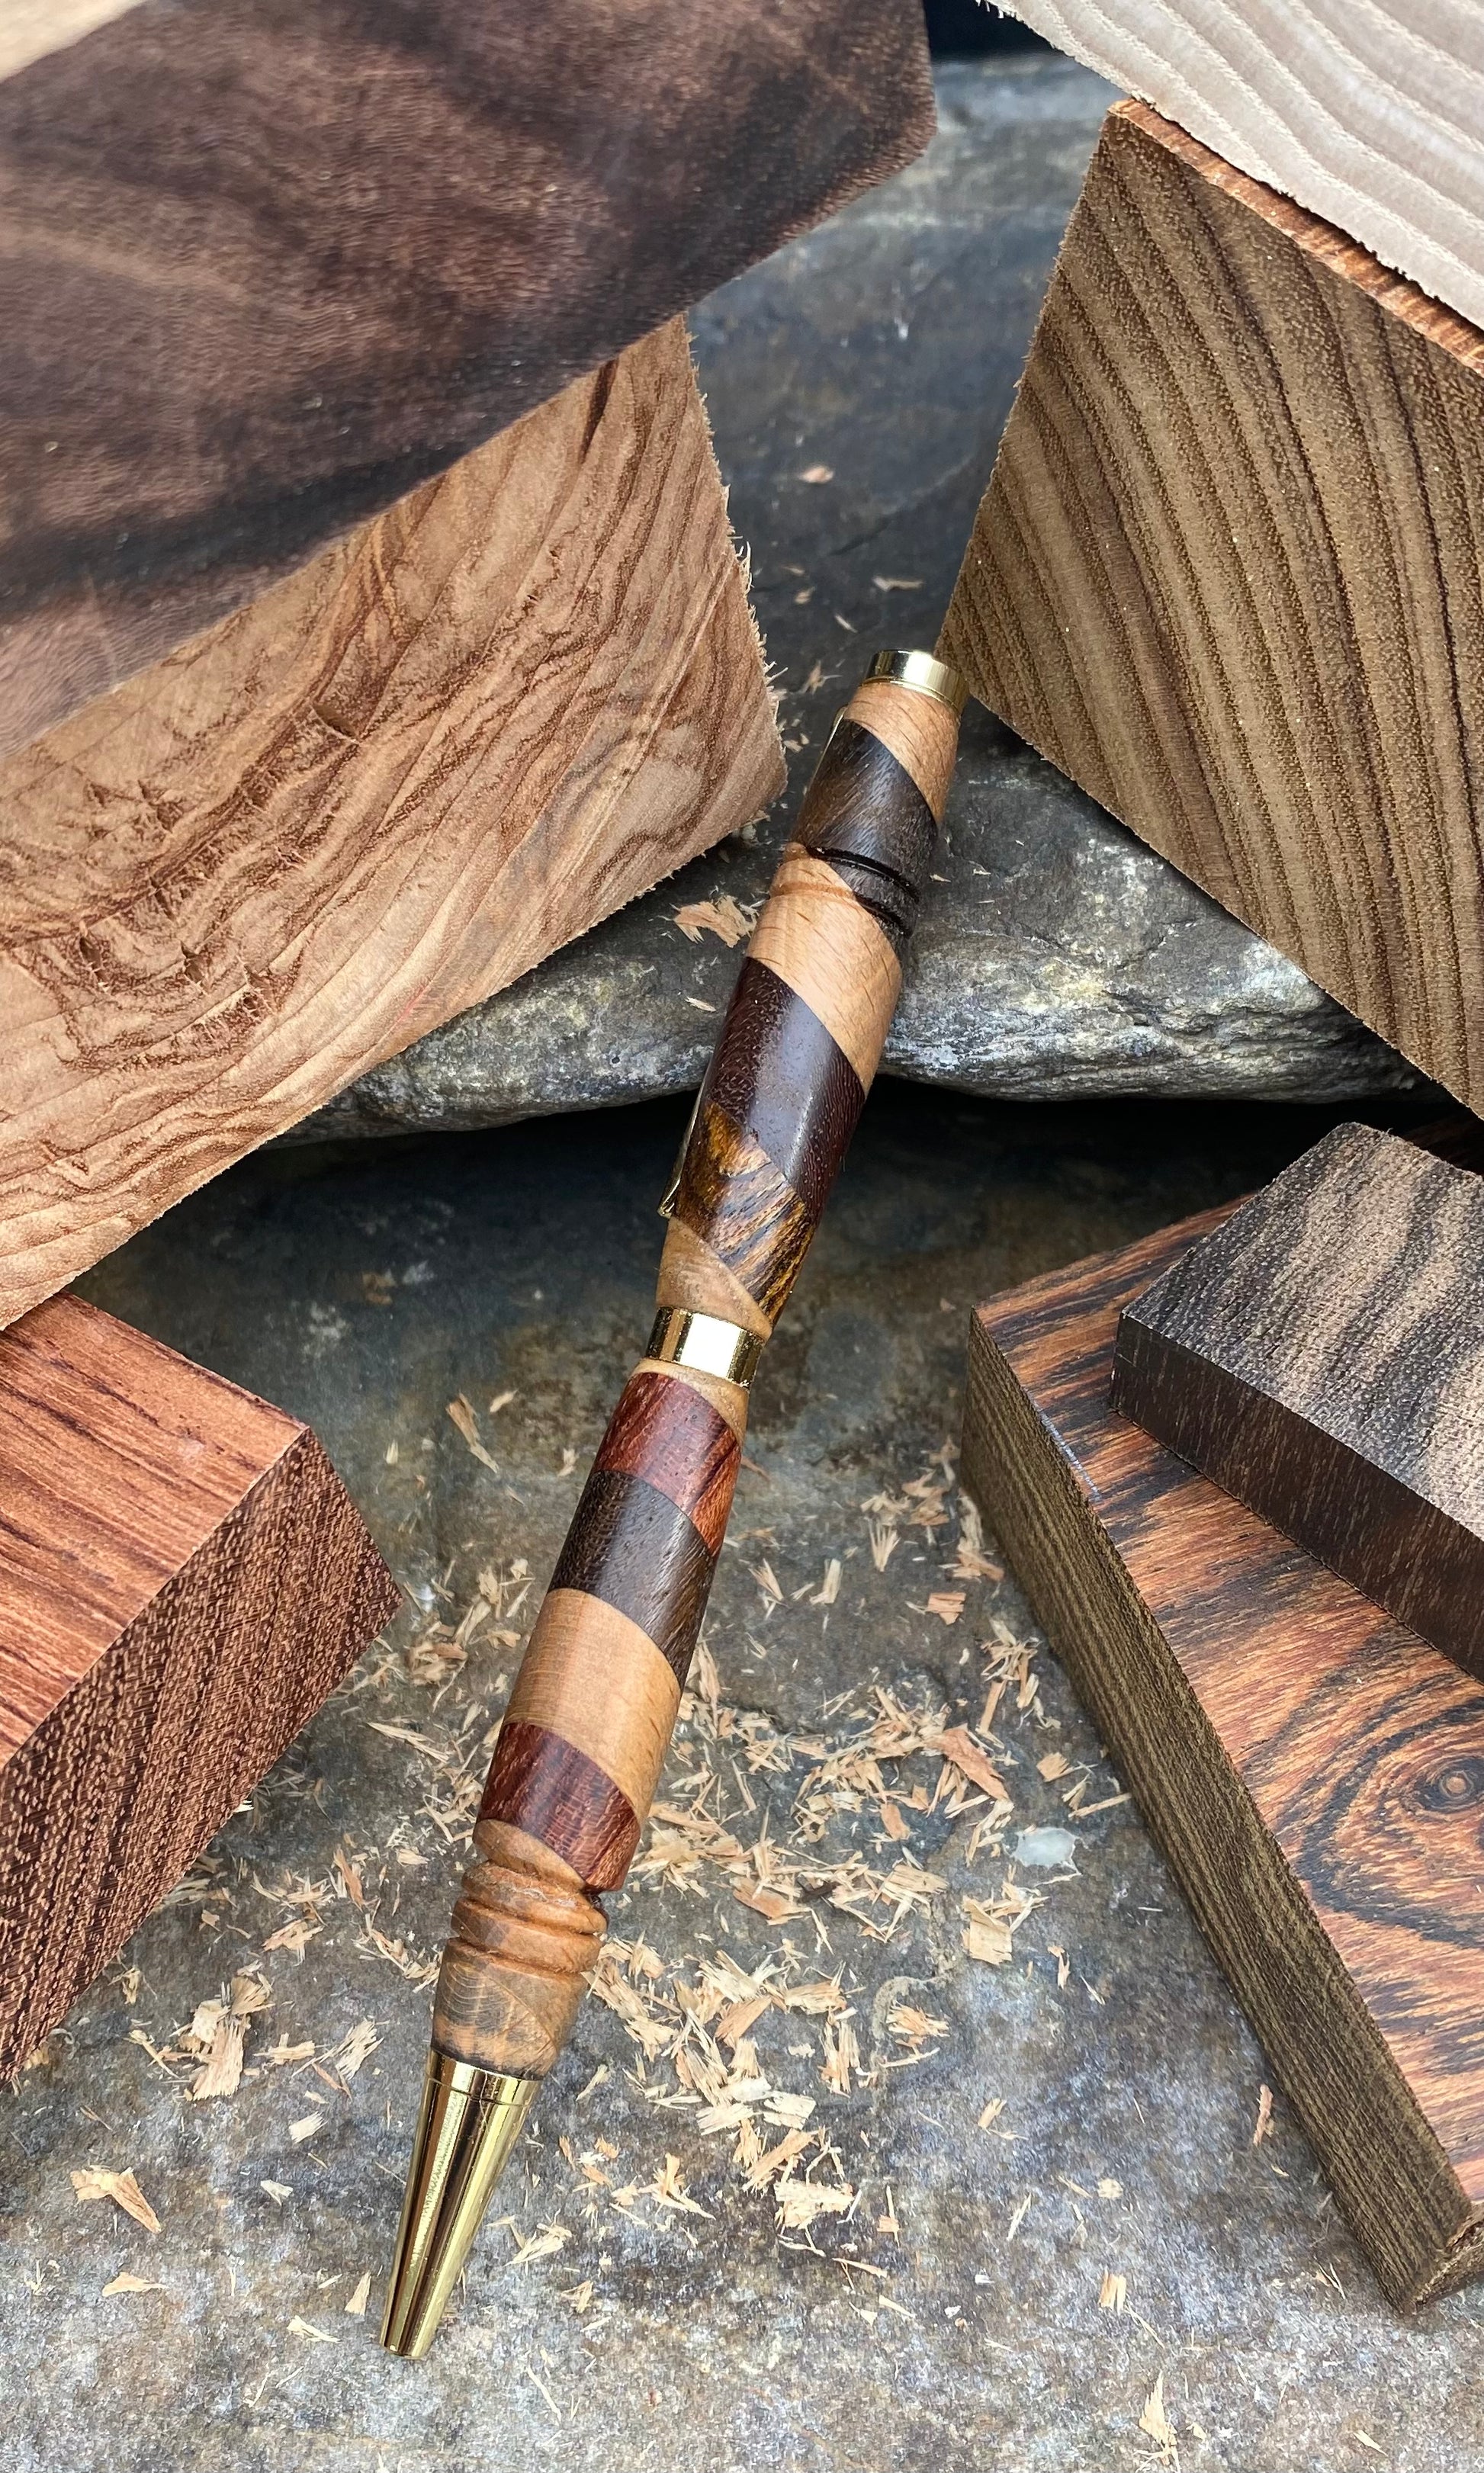 Handcrafted Black Limba Wood Pen – The Red Artisan & Company